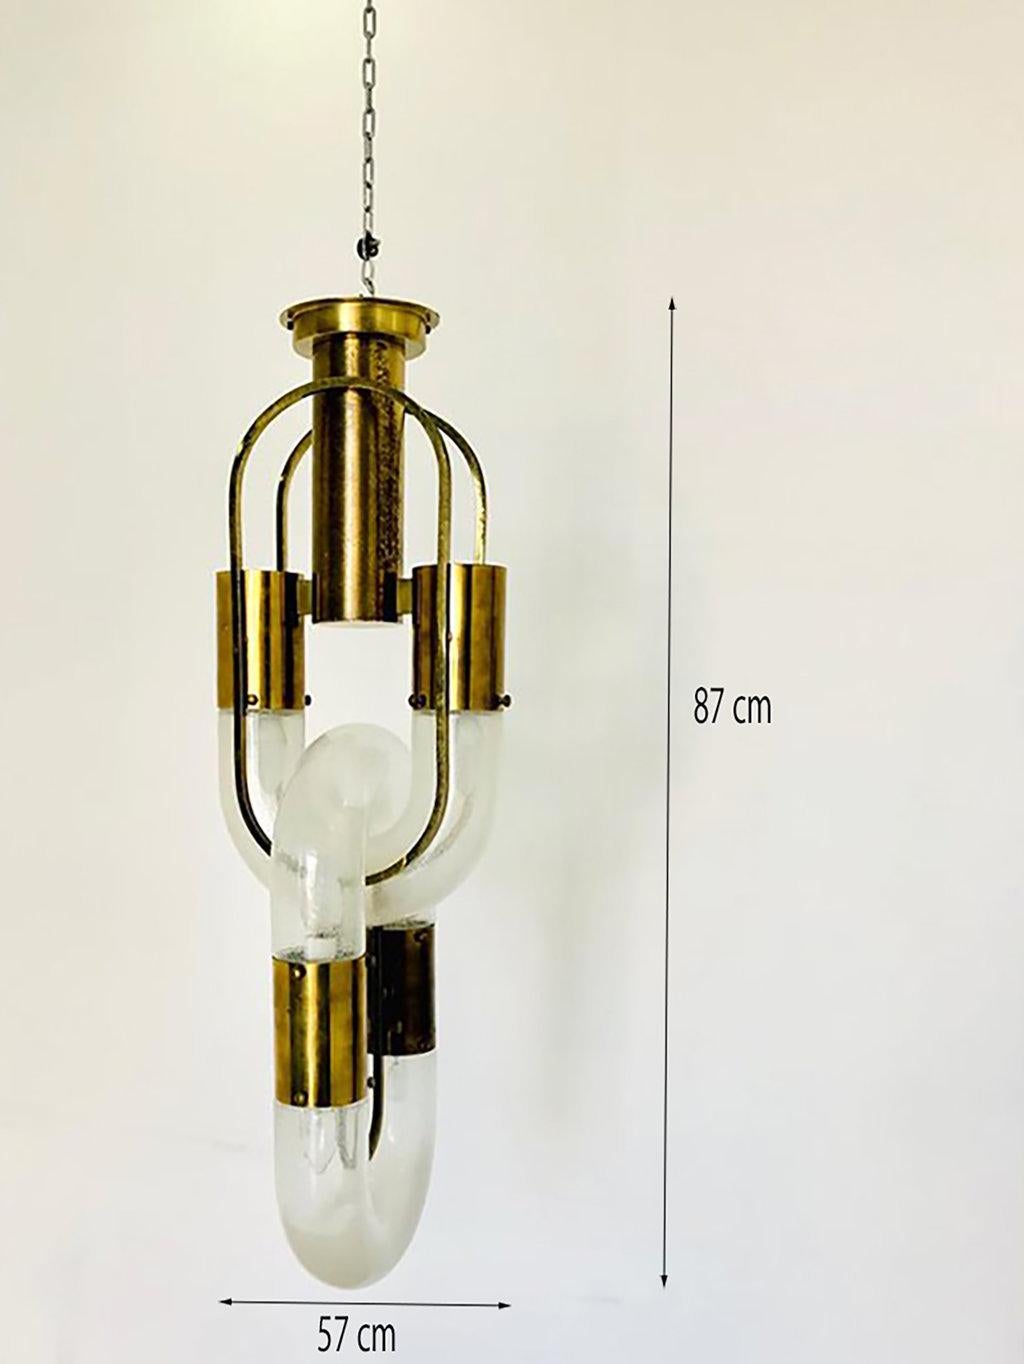 This brass and Murano glass chandelier is an original decorative object designed by the Italian glassworker Aldo Nason and realized by the prestigious Glassware Mazzega in Venice in the 1970s.

It is, in particular, a six-light chandelier, made of